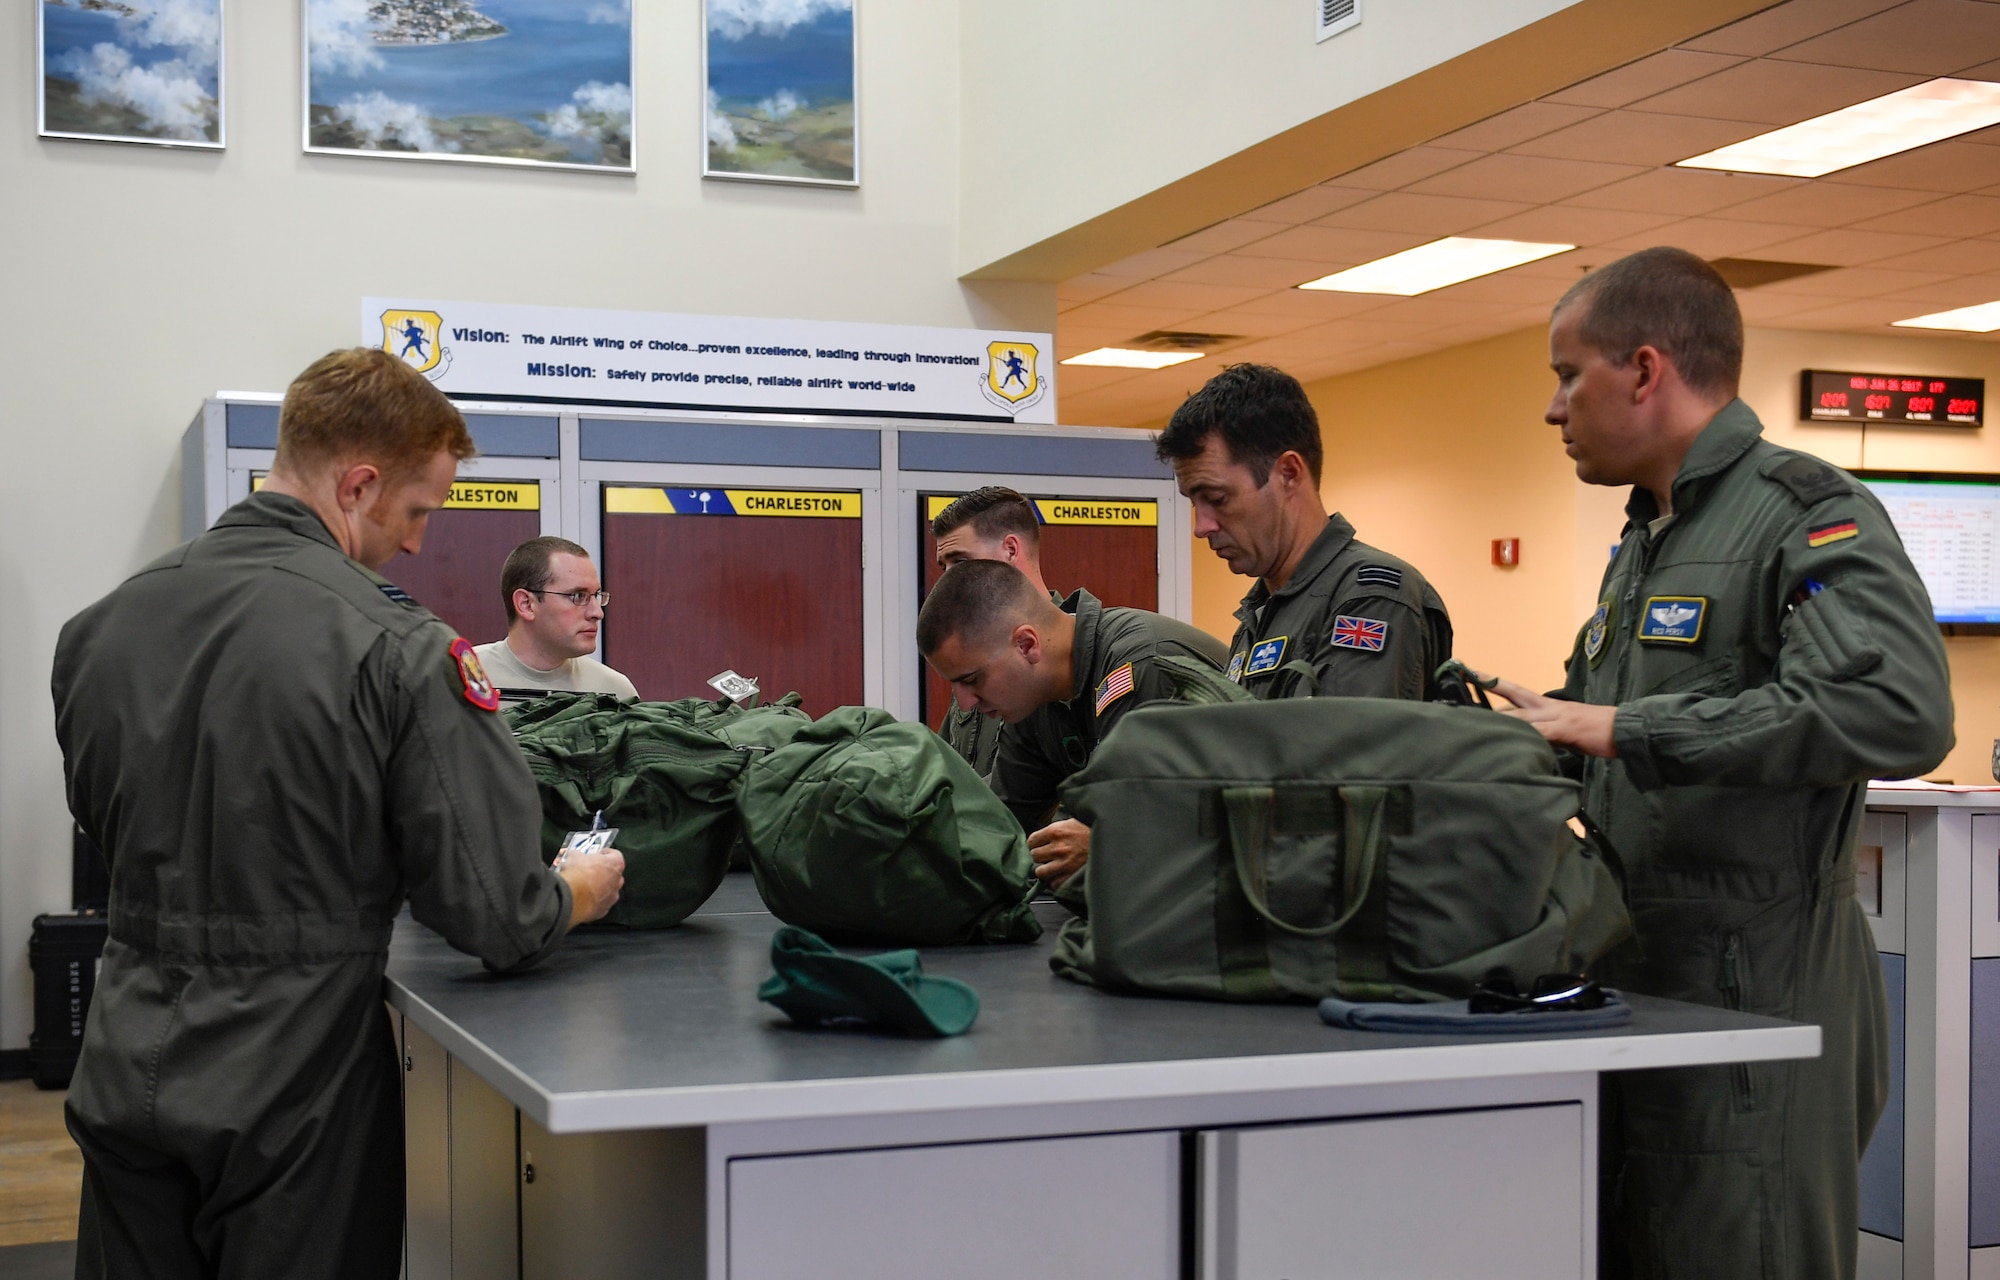 Pilots participating in the foreign exchange program and aircrew members from the 14th Airlift Squadron, inspect flight operational equipment prior to a mission flight here June 26, 2017. The focus of the program is cross-training and cross-operation aspects that provide insight for foreign nationals learning U.S. Air Force procedures and to provide additional understanding of the different ways our partner nations operate.